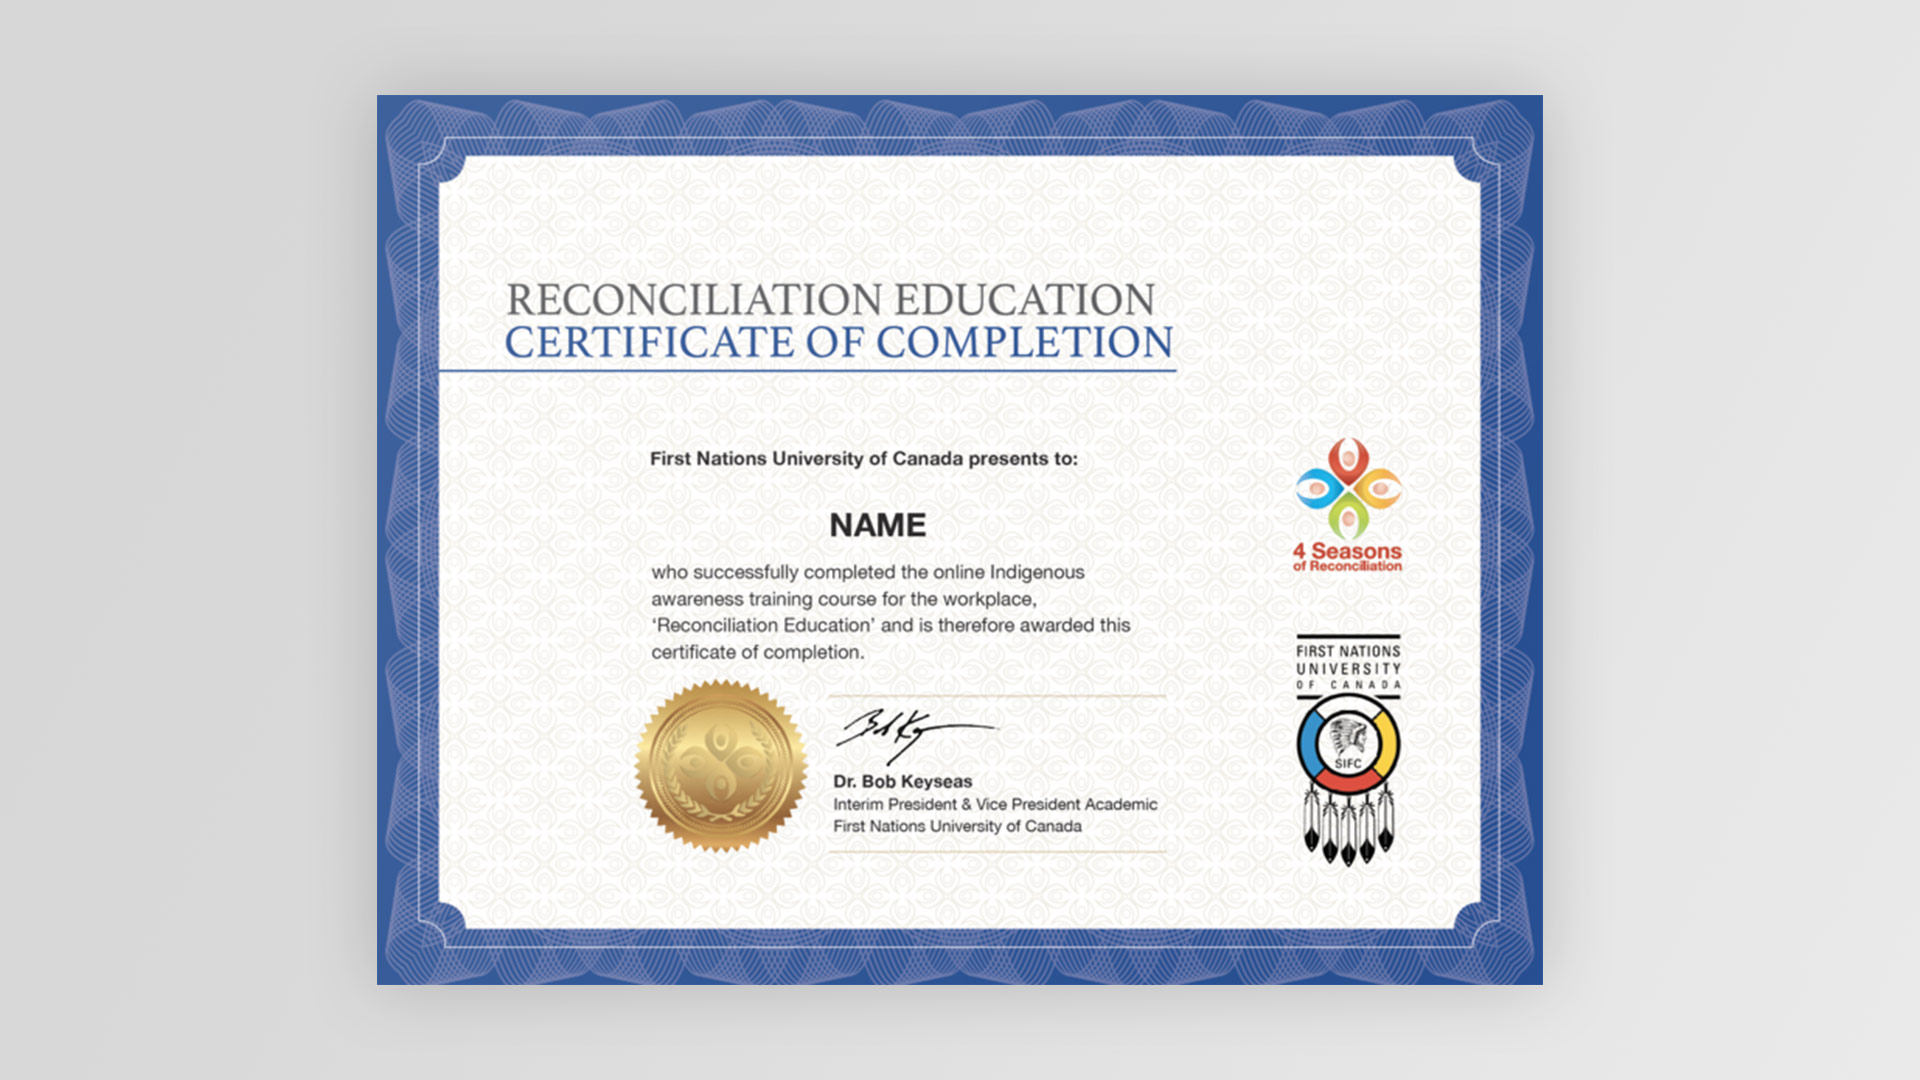 Reconciliation Education Certificate of Completion sample document